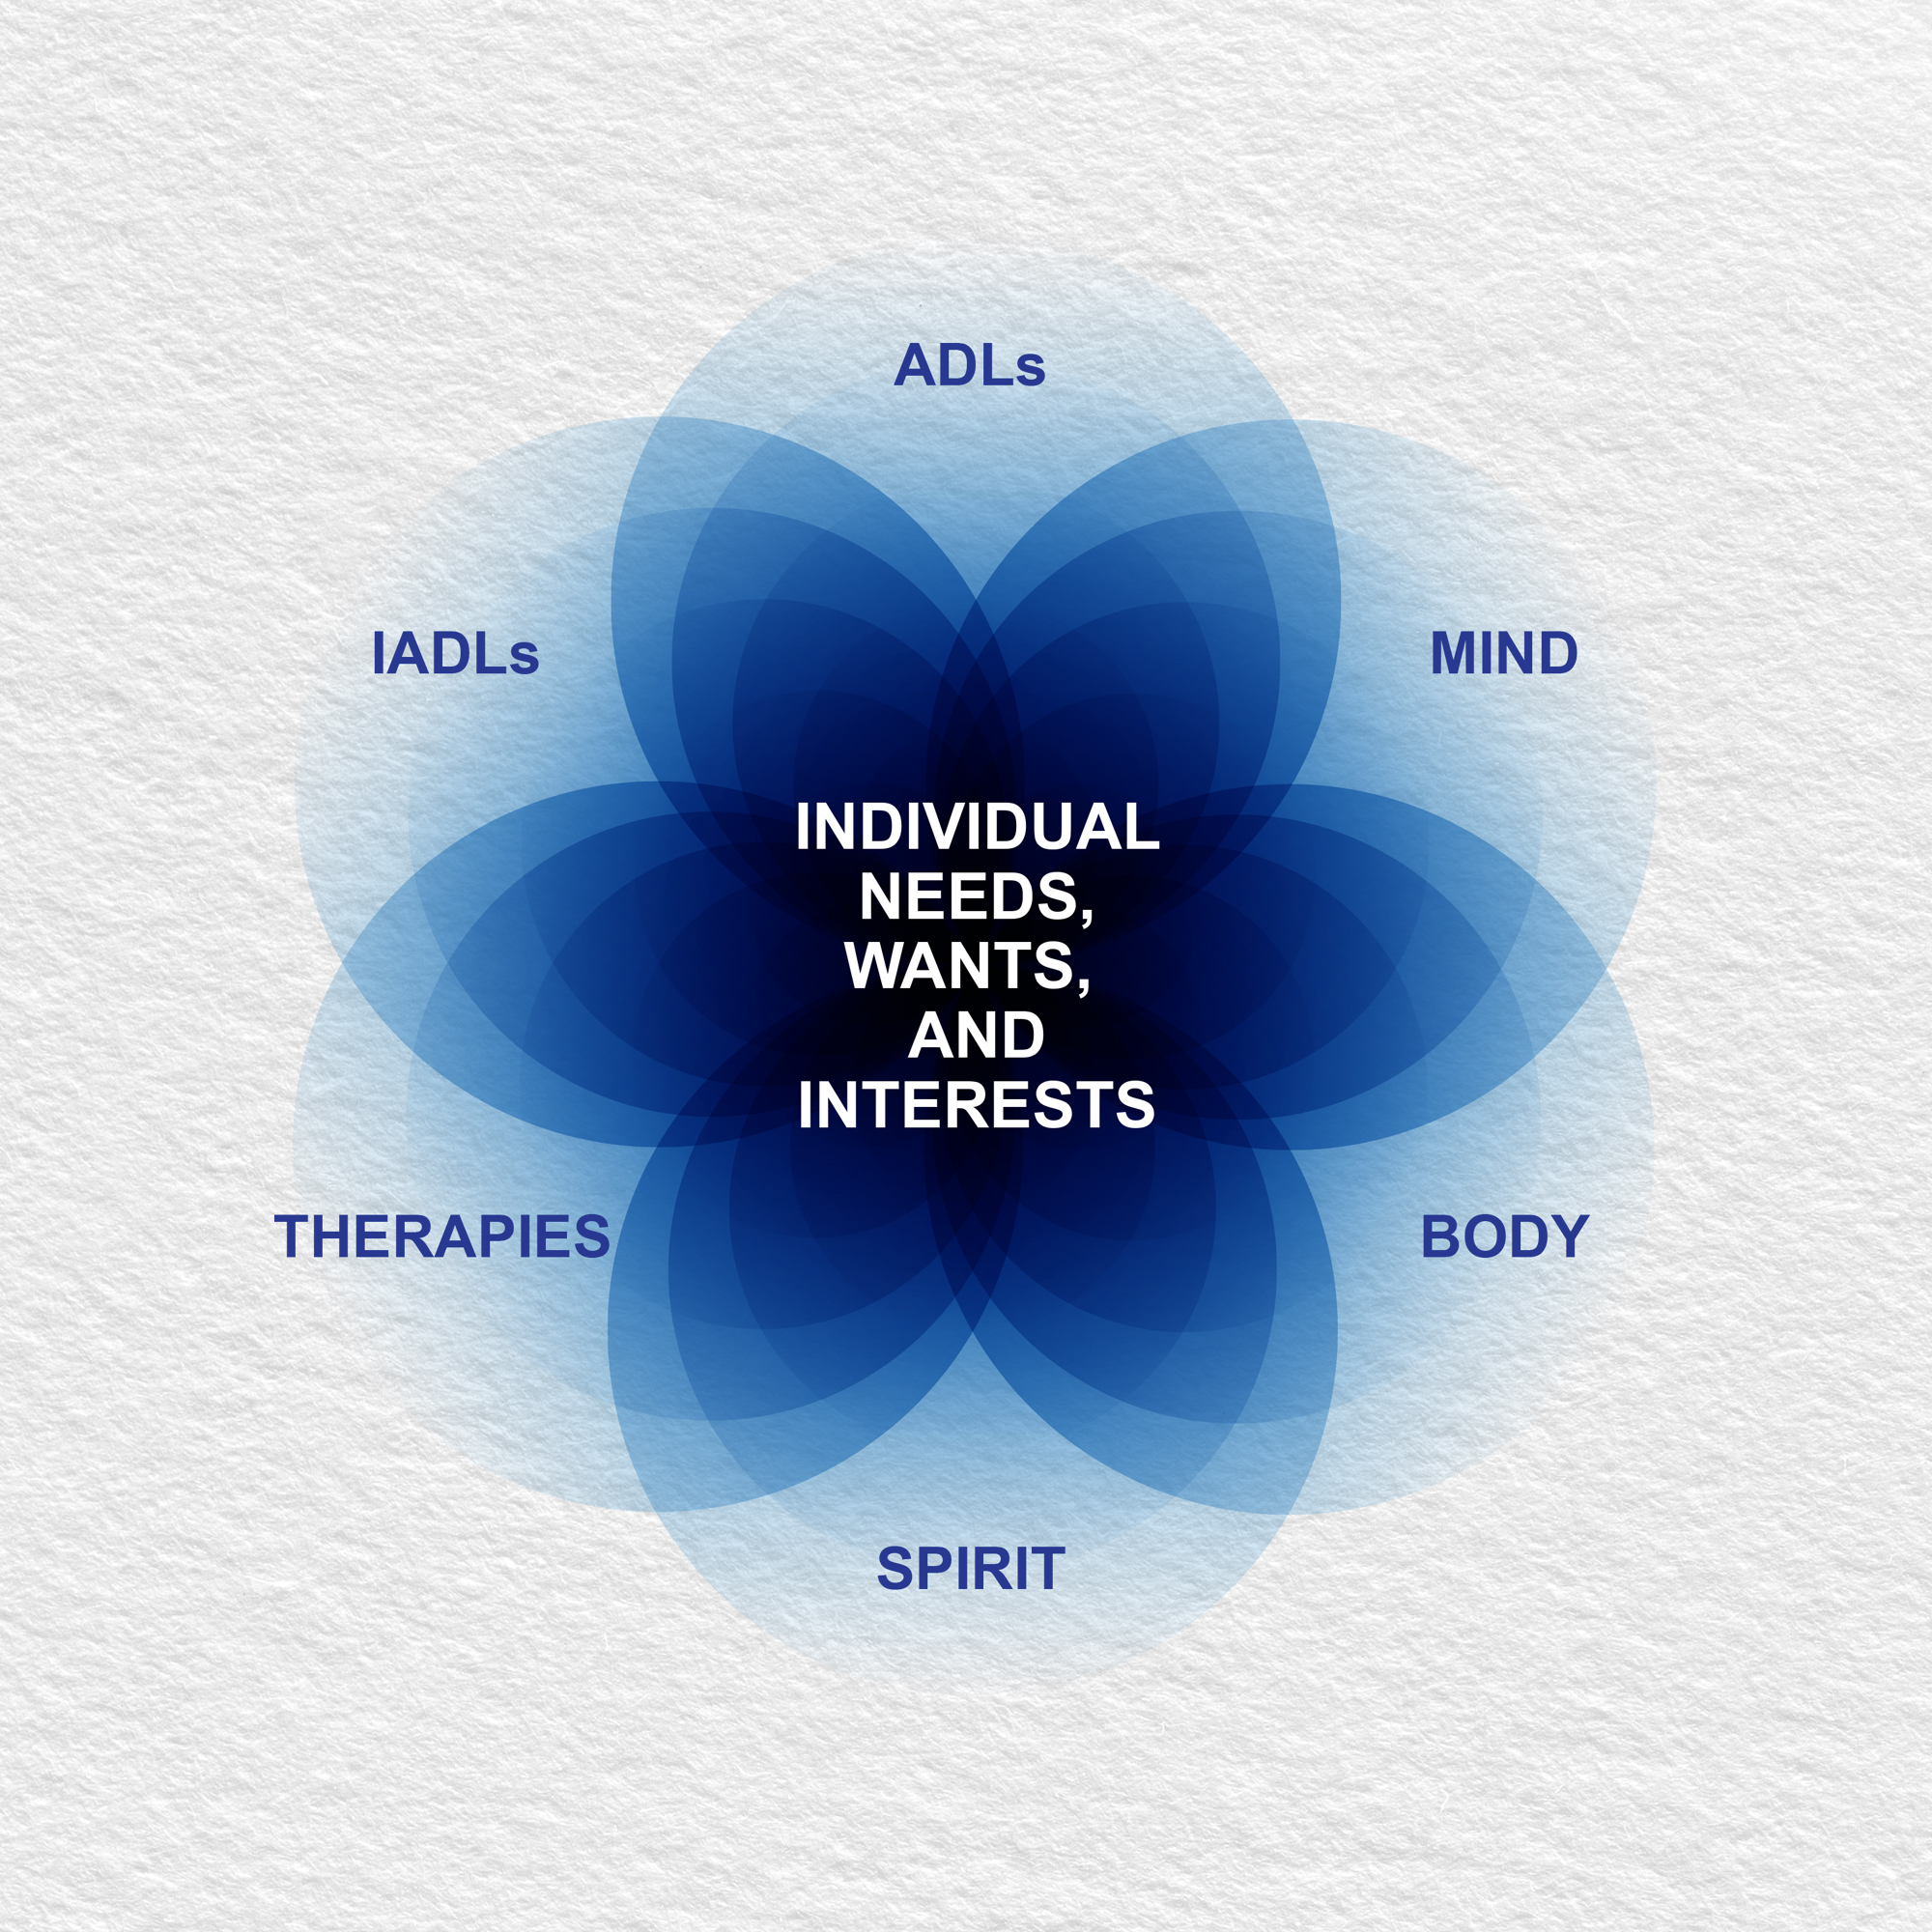 Image of lotus depicting all areas that services address